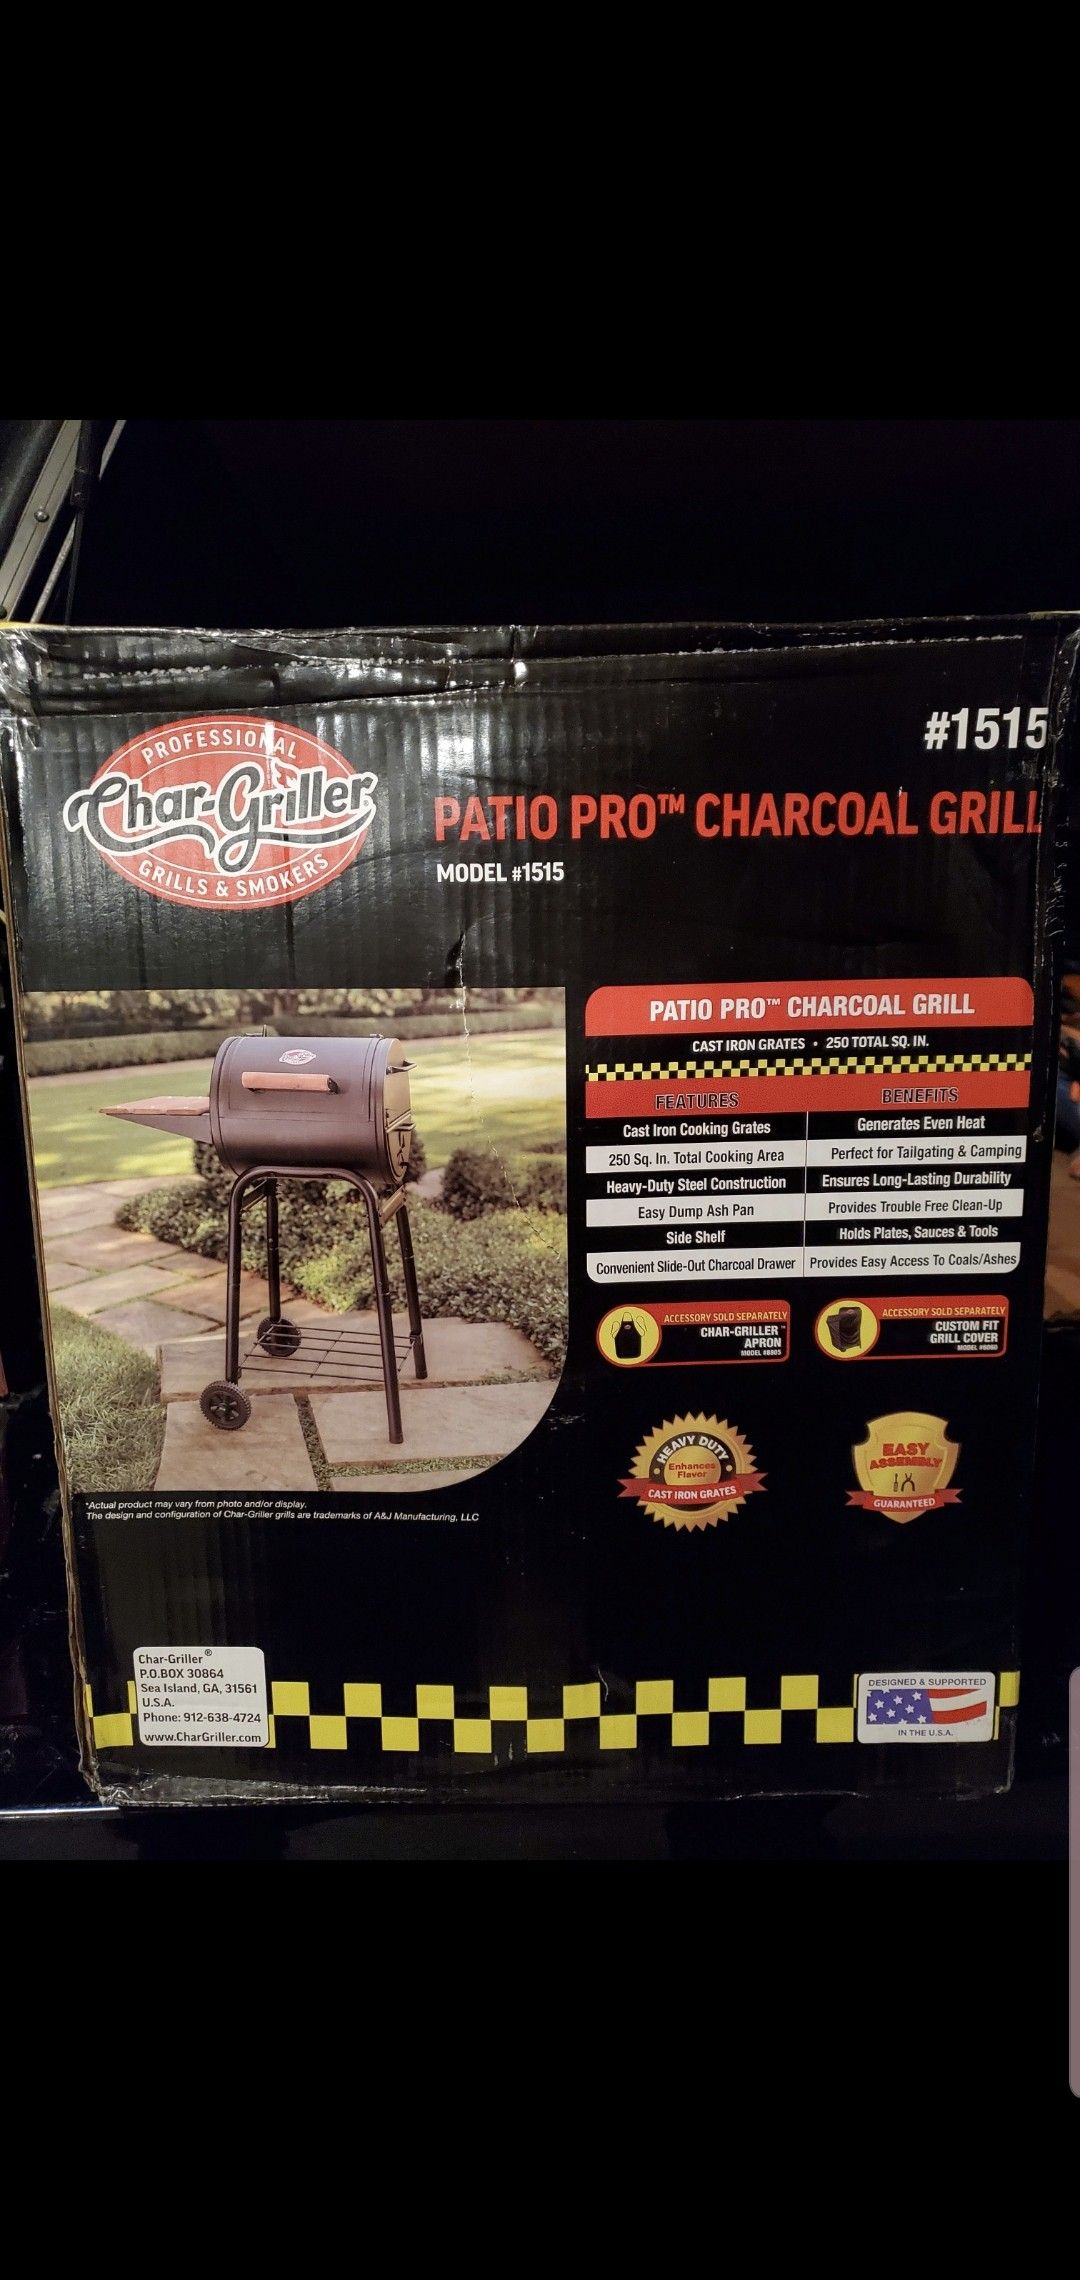 BBQ GRILL BRAND NEW IN THE BOX!